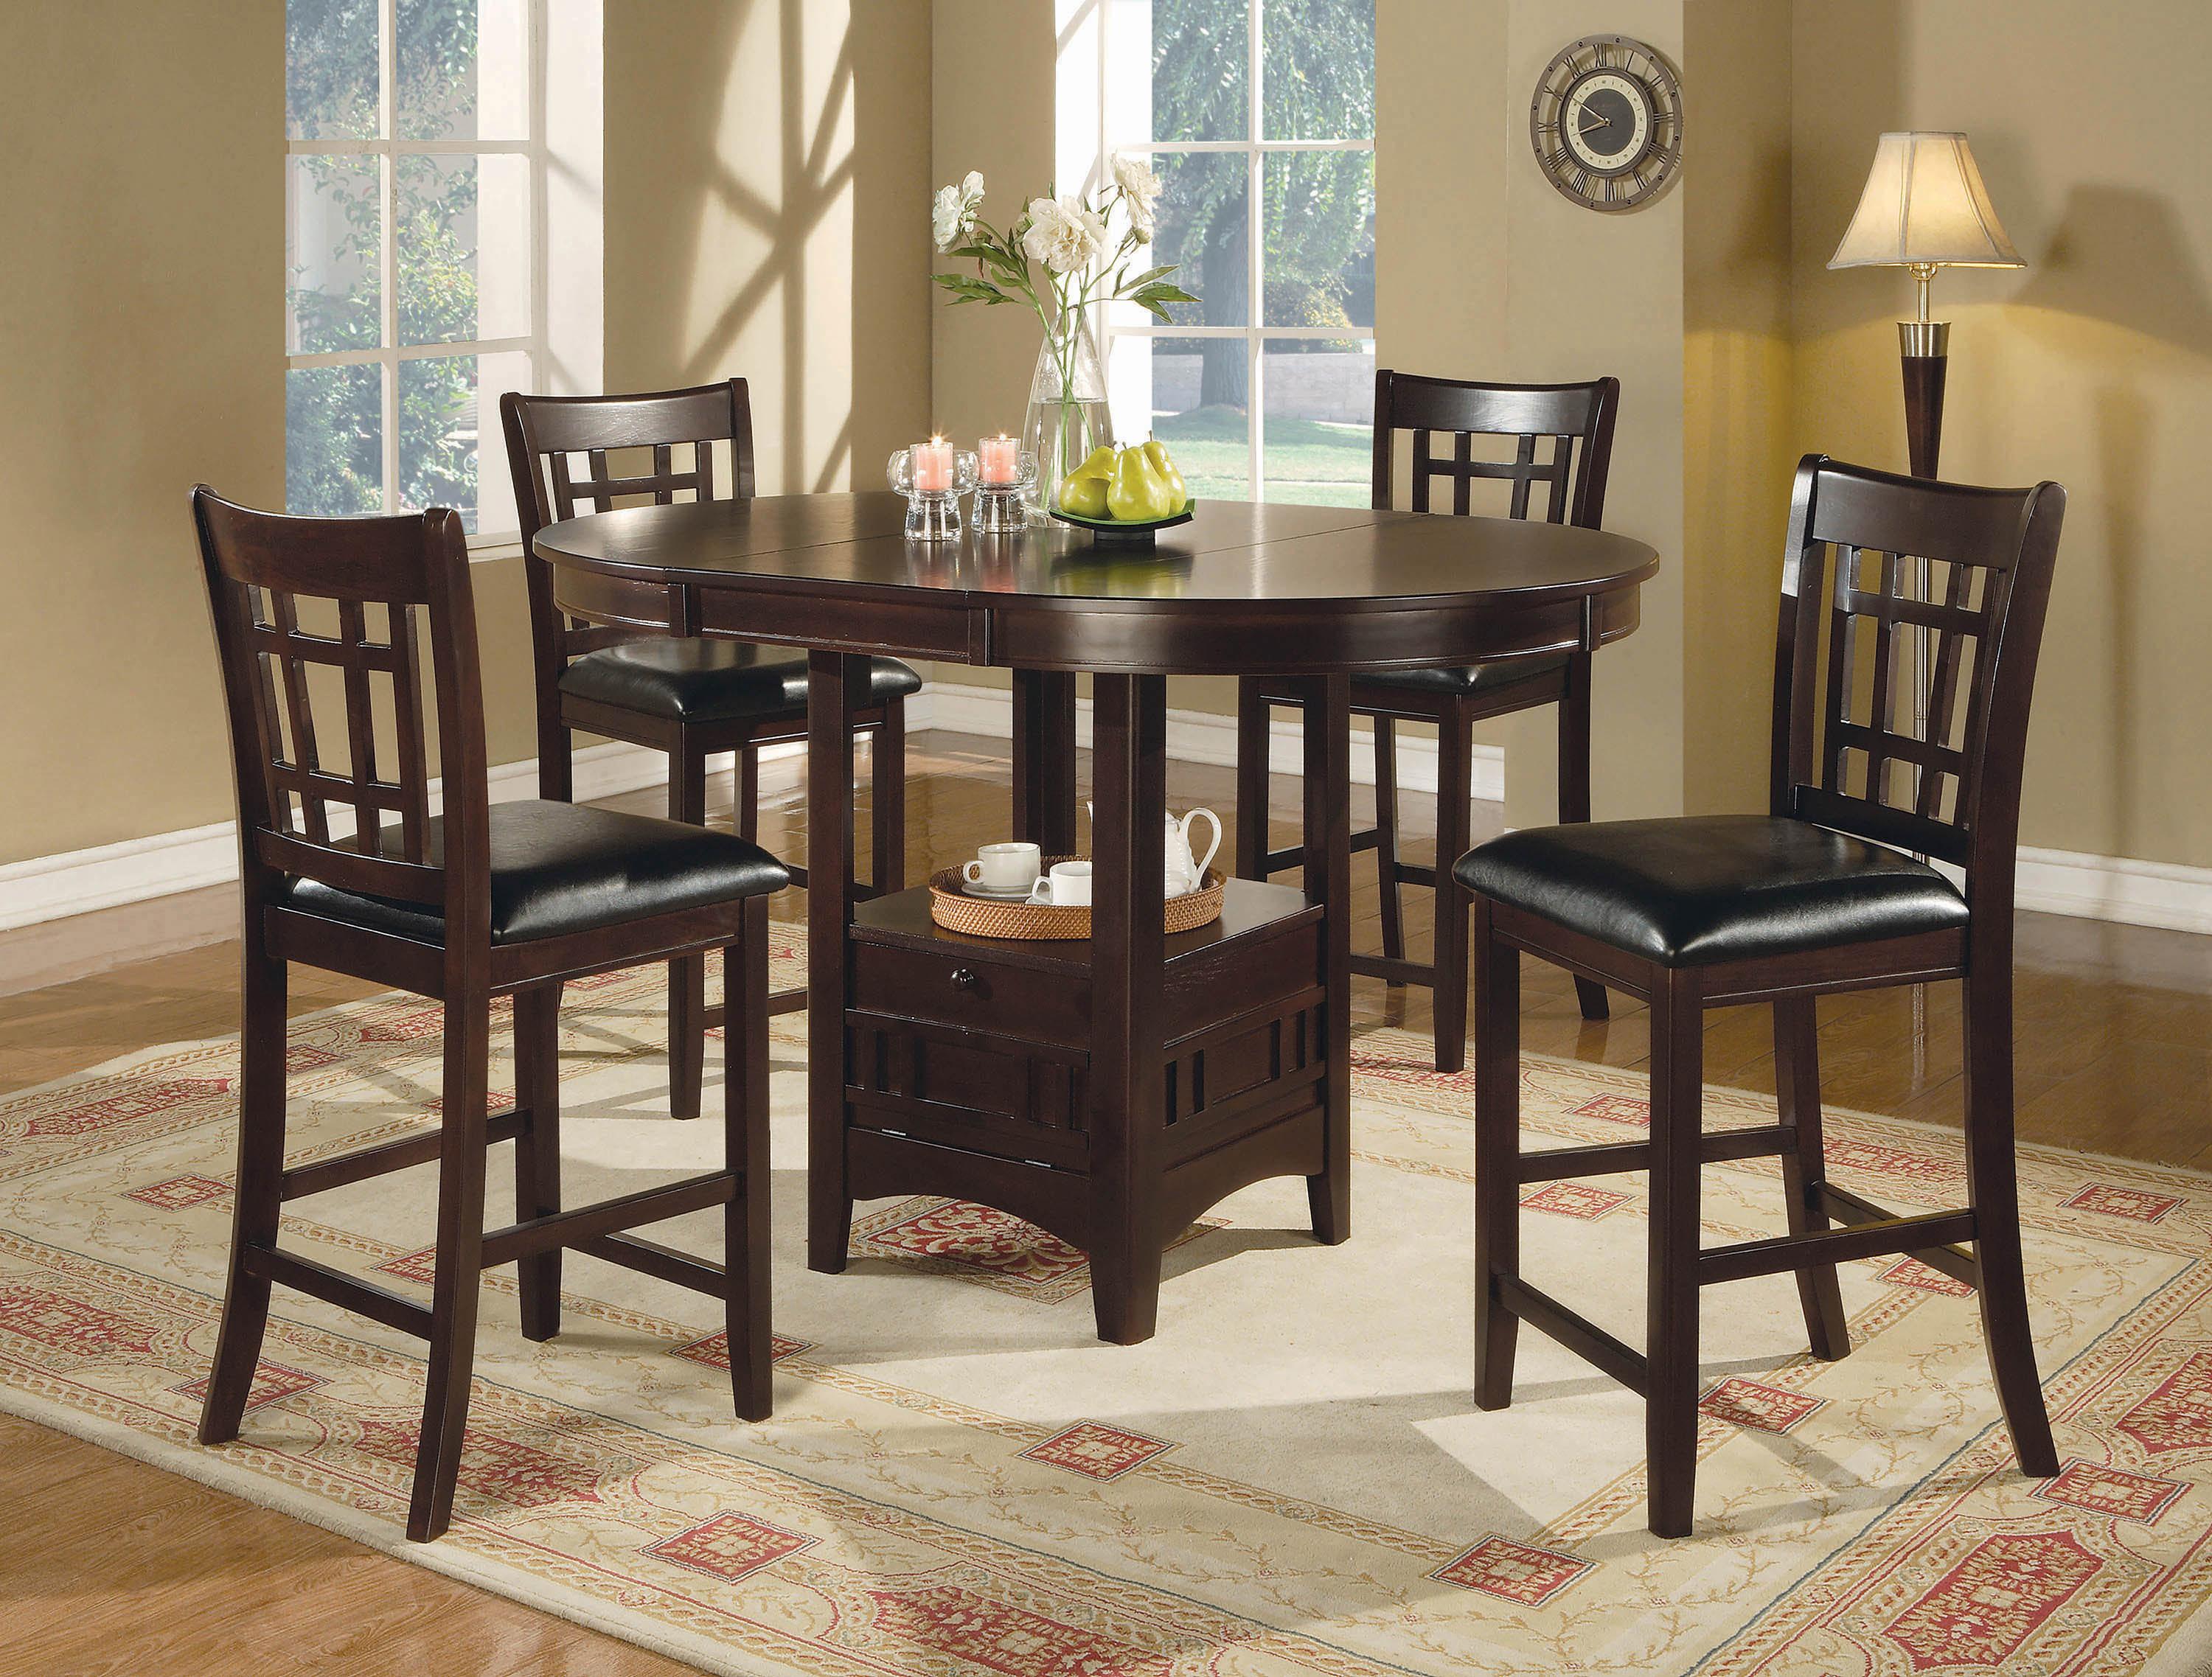 Transitional Dining Room Set 102888-S5 Lavon 102888-S5 in Espresso Leatherette